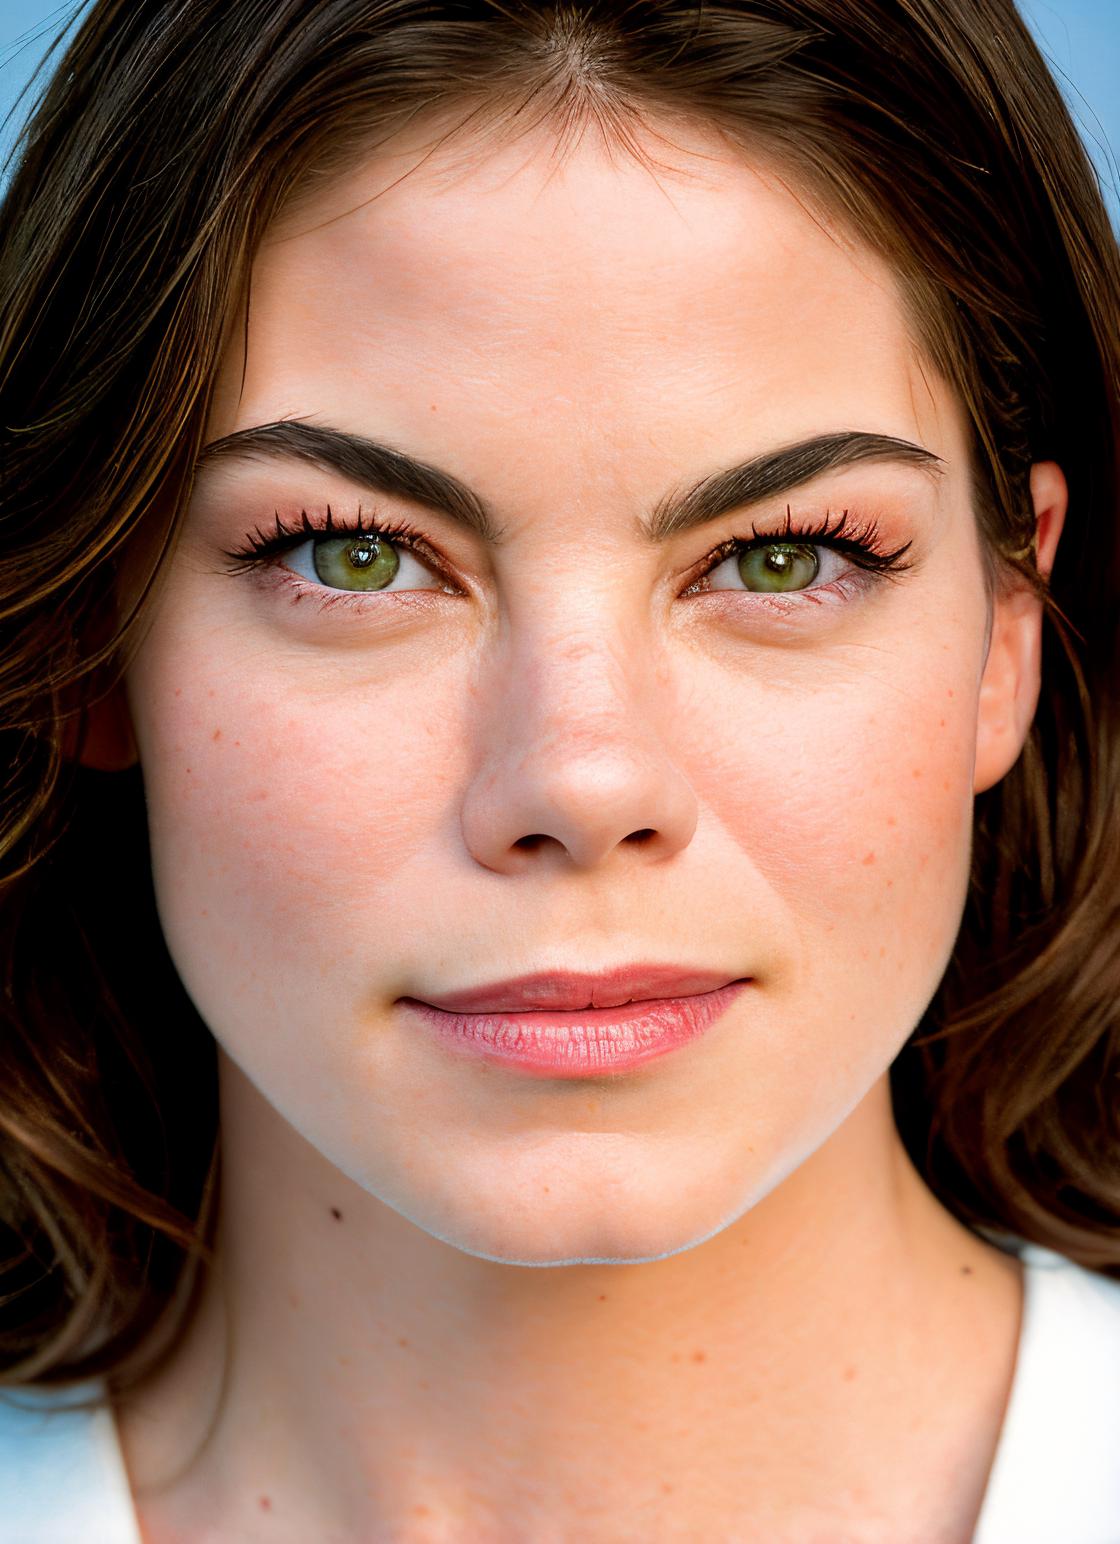 Michelle Monaghan image by astragartist